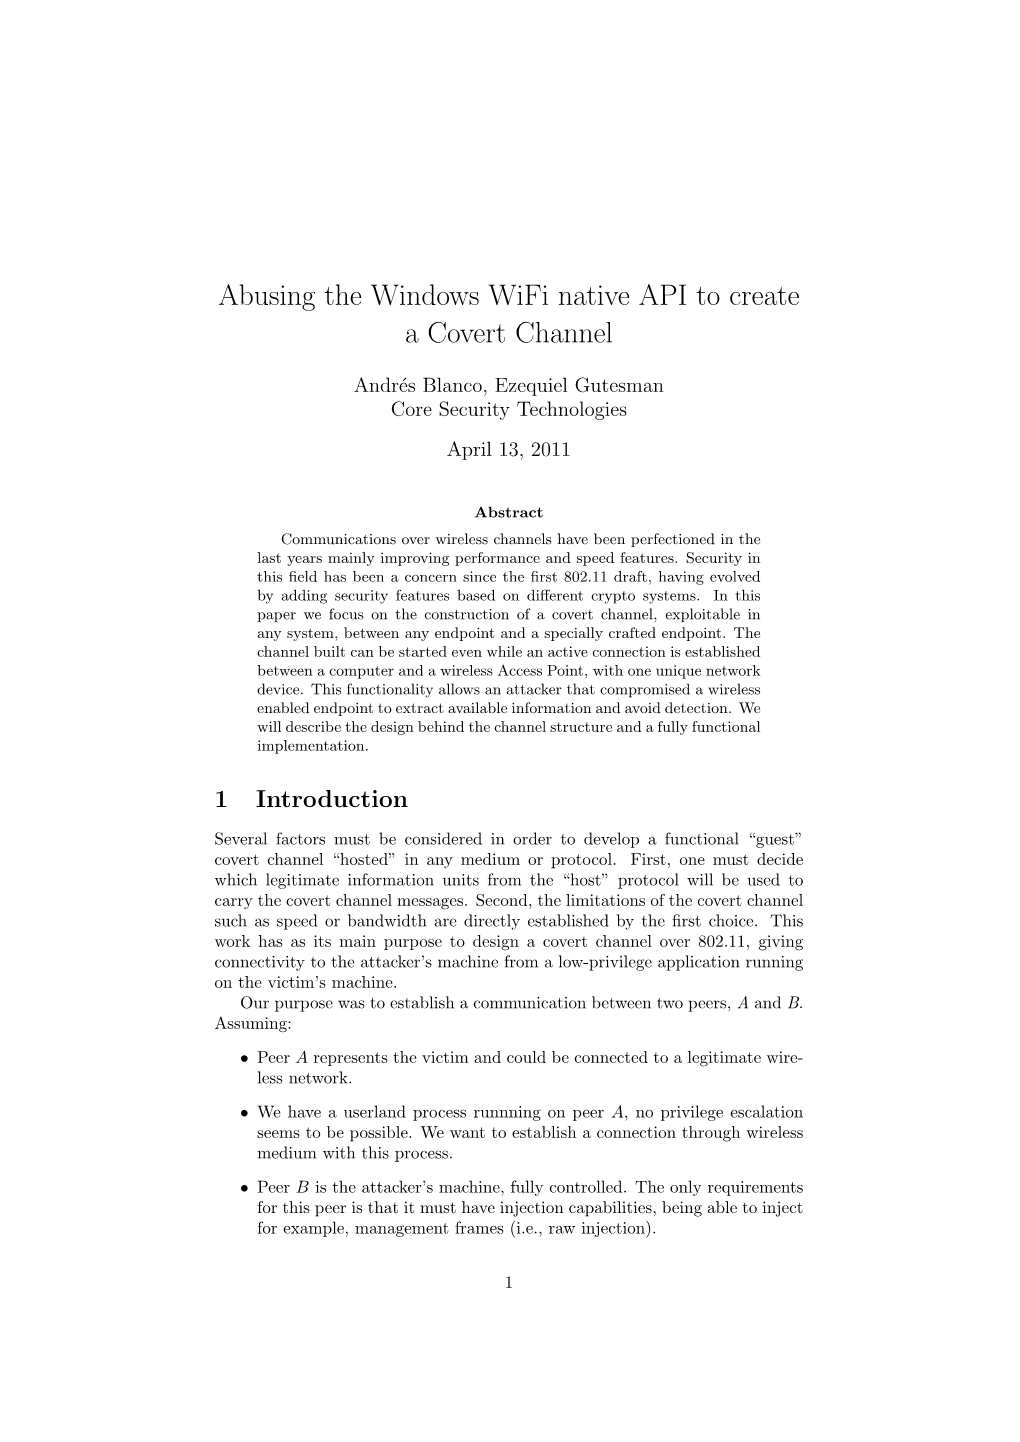 Abusing the Windows Wifi Native API to Create a Covert Channel